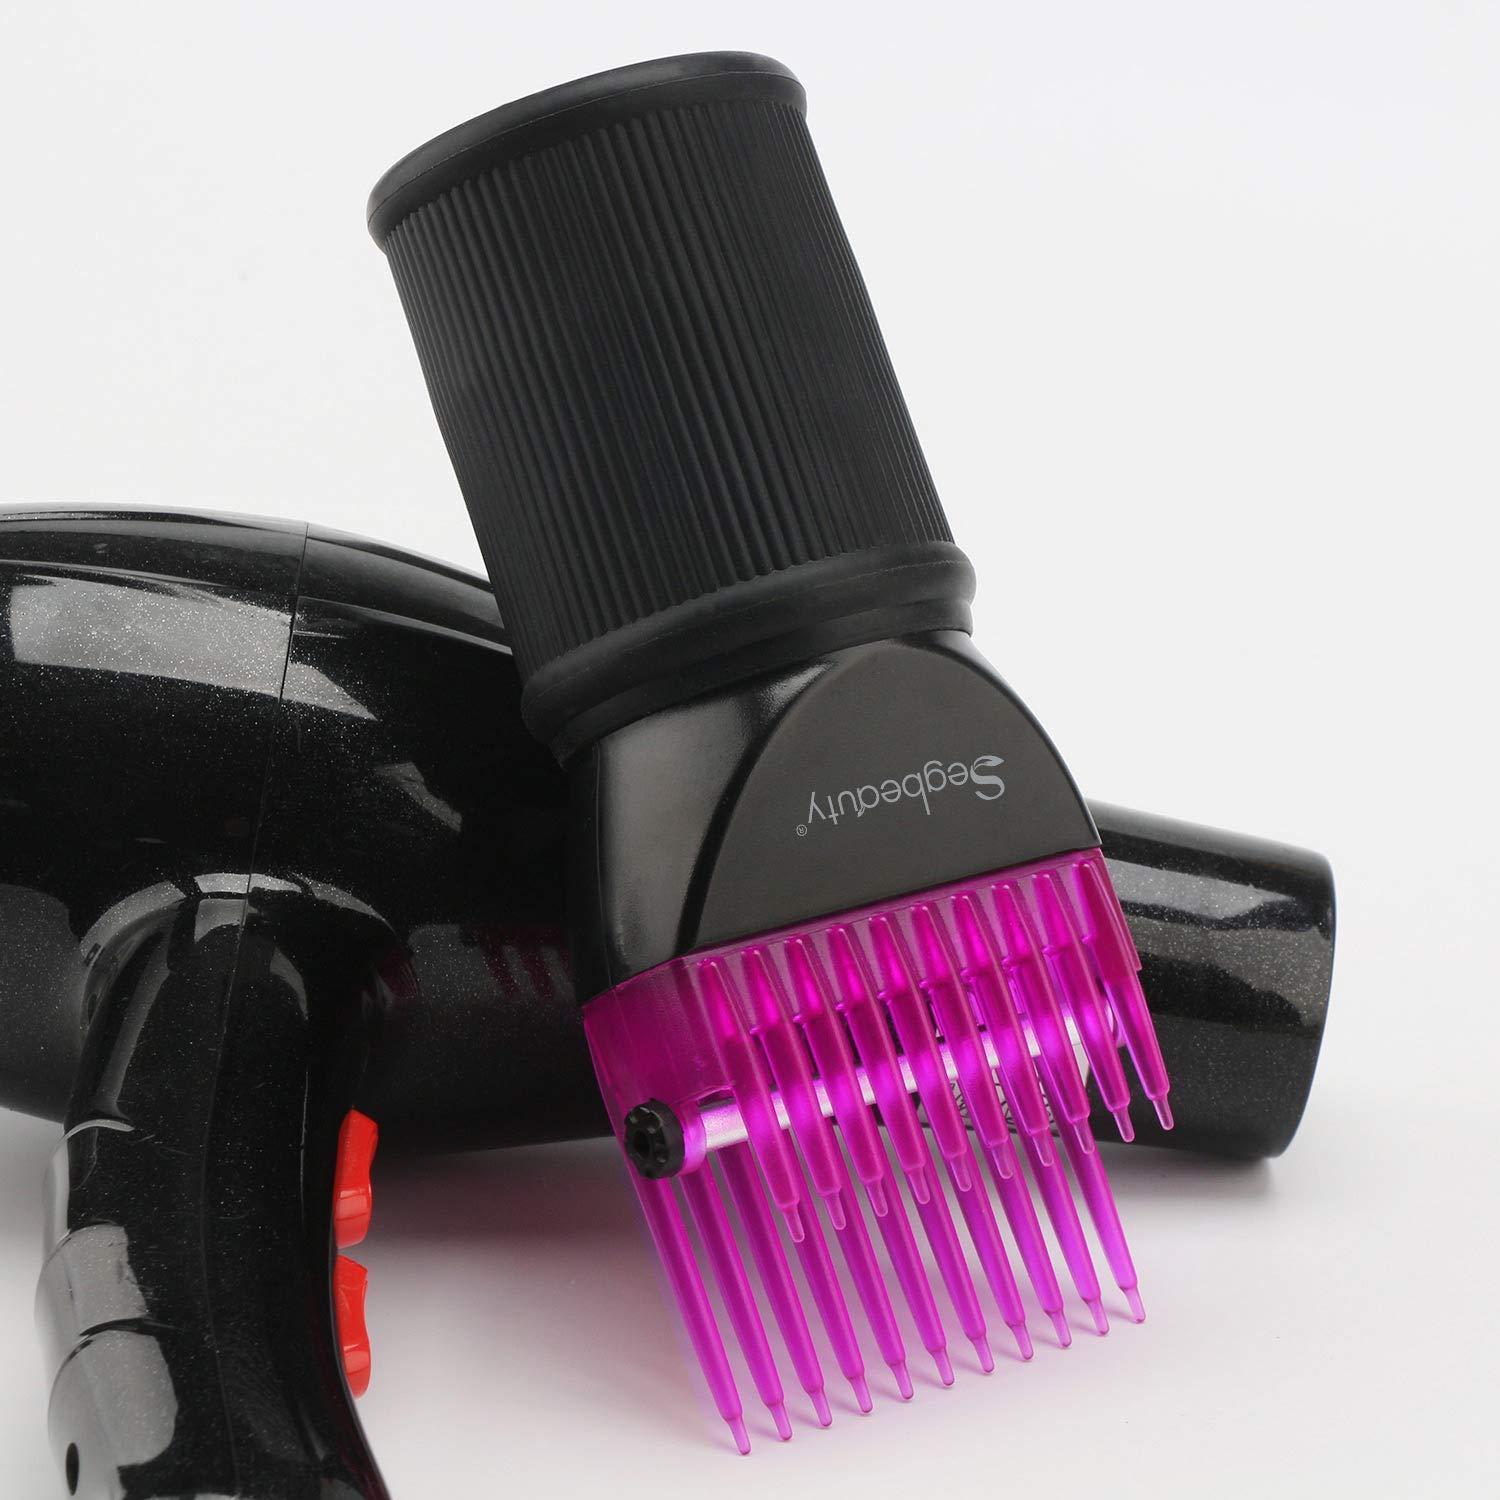 Blow Dryer Comb Attachment, Segbeauty Hair Dryer Blower Concentrator Nozzle   Brush Attachments, Hairdressing Styling Salon Tool Pic for  Fine, Wavy, Curly, Natural Hair Purple